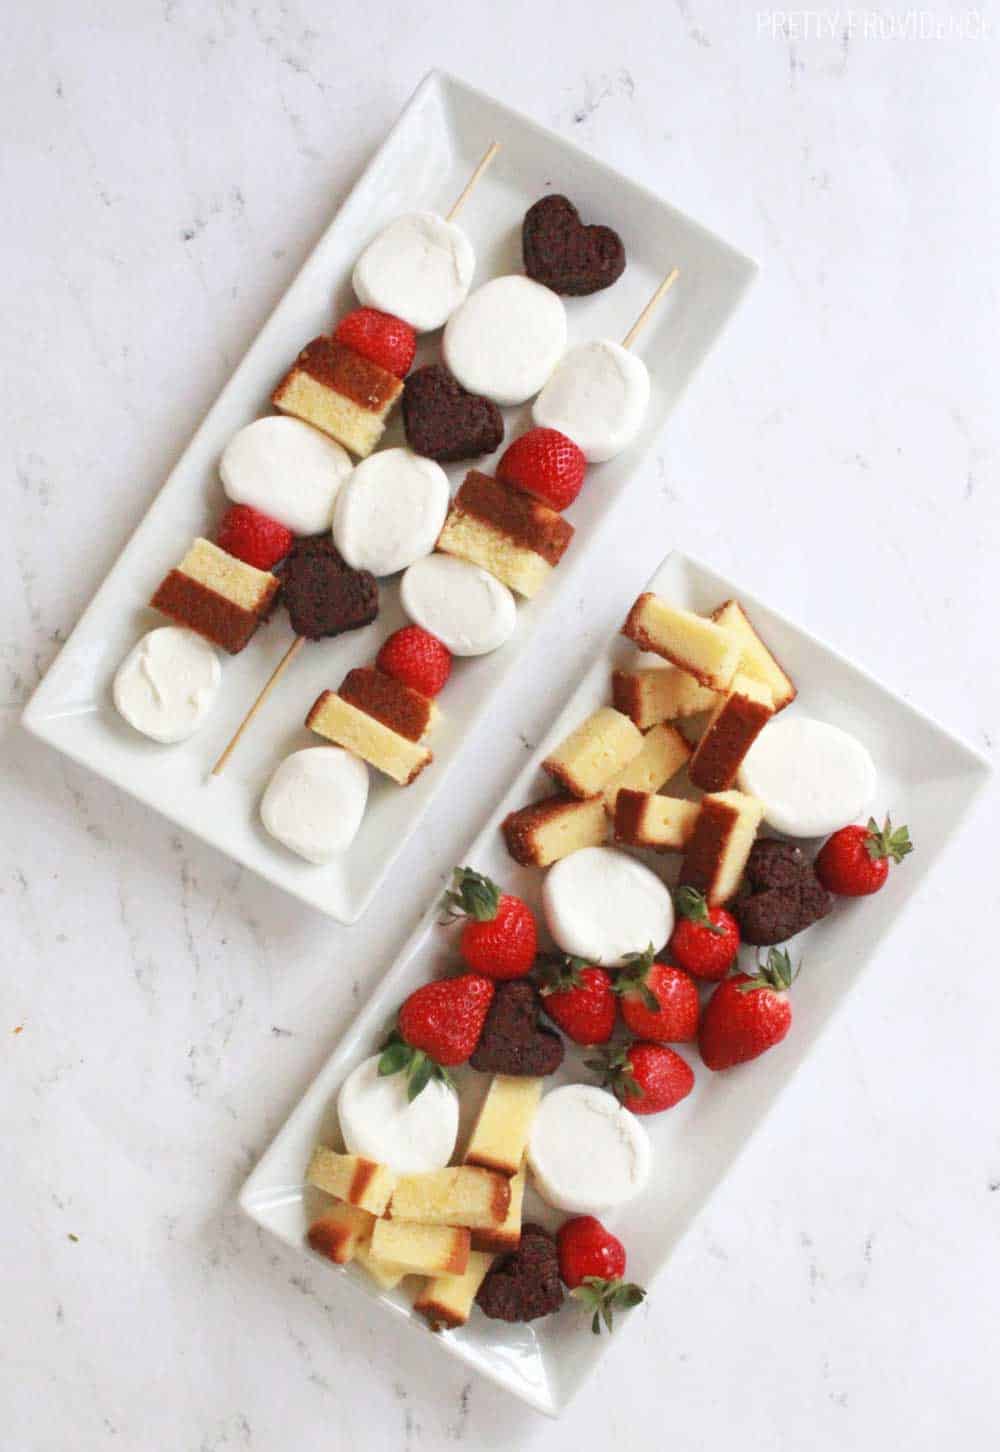 Fancy fondue dippers for Valentine's Day or anniversary desserts! Heart shaped brownies, marshmallows and strawberries are perfect for chocolate fondue!